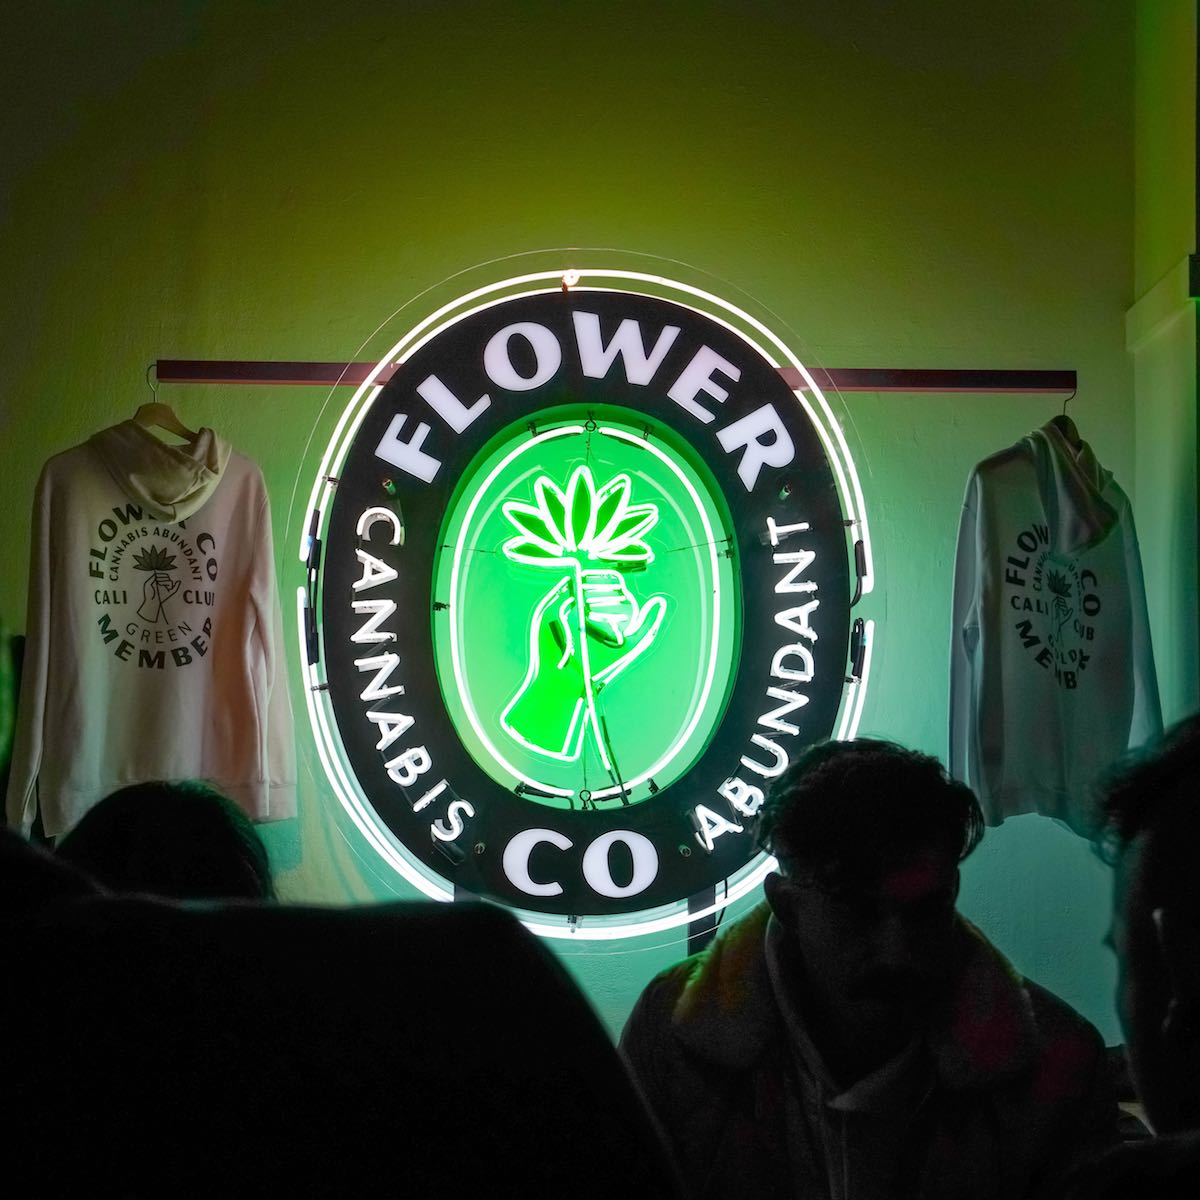 FLOWER CO. events are popping up in California. (Courtesy FLOWER CO.)